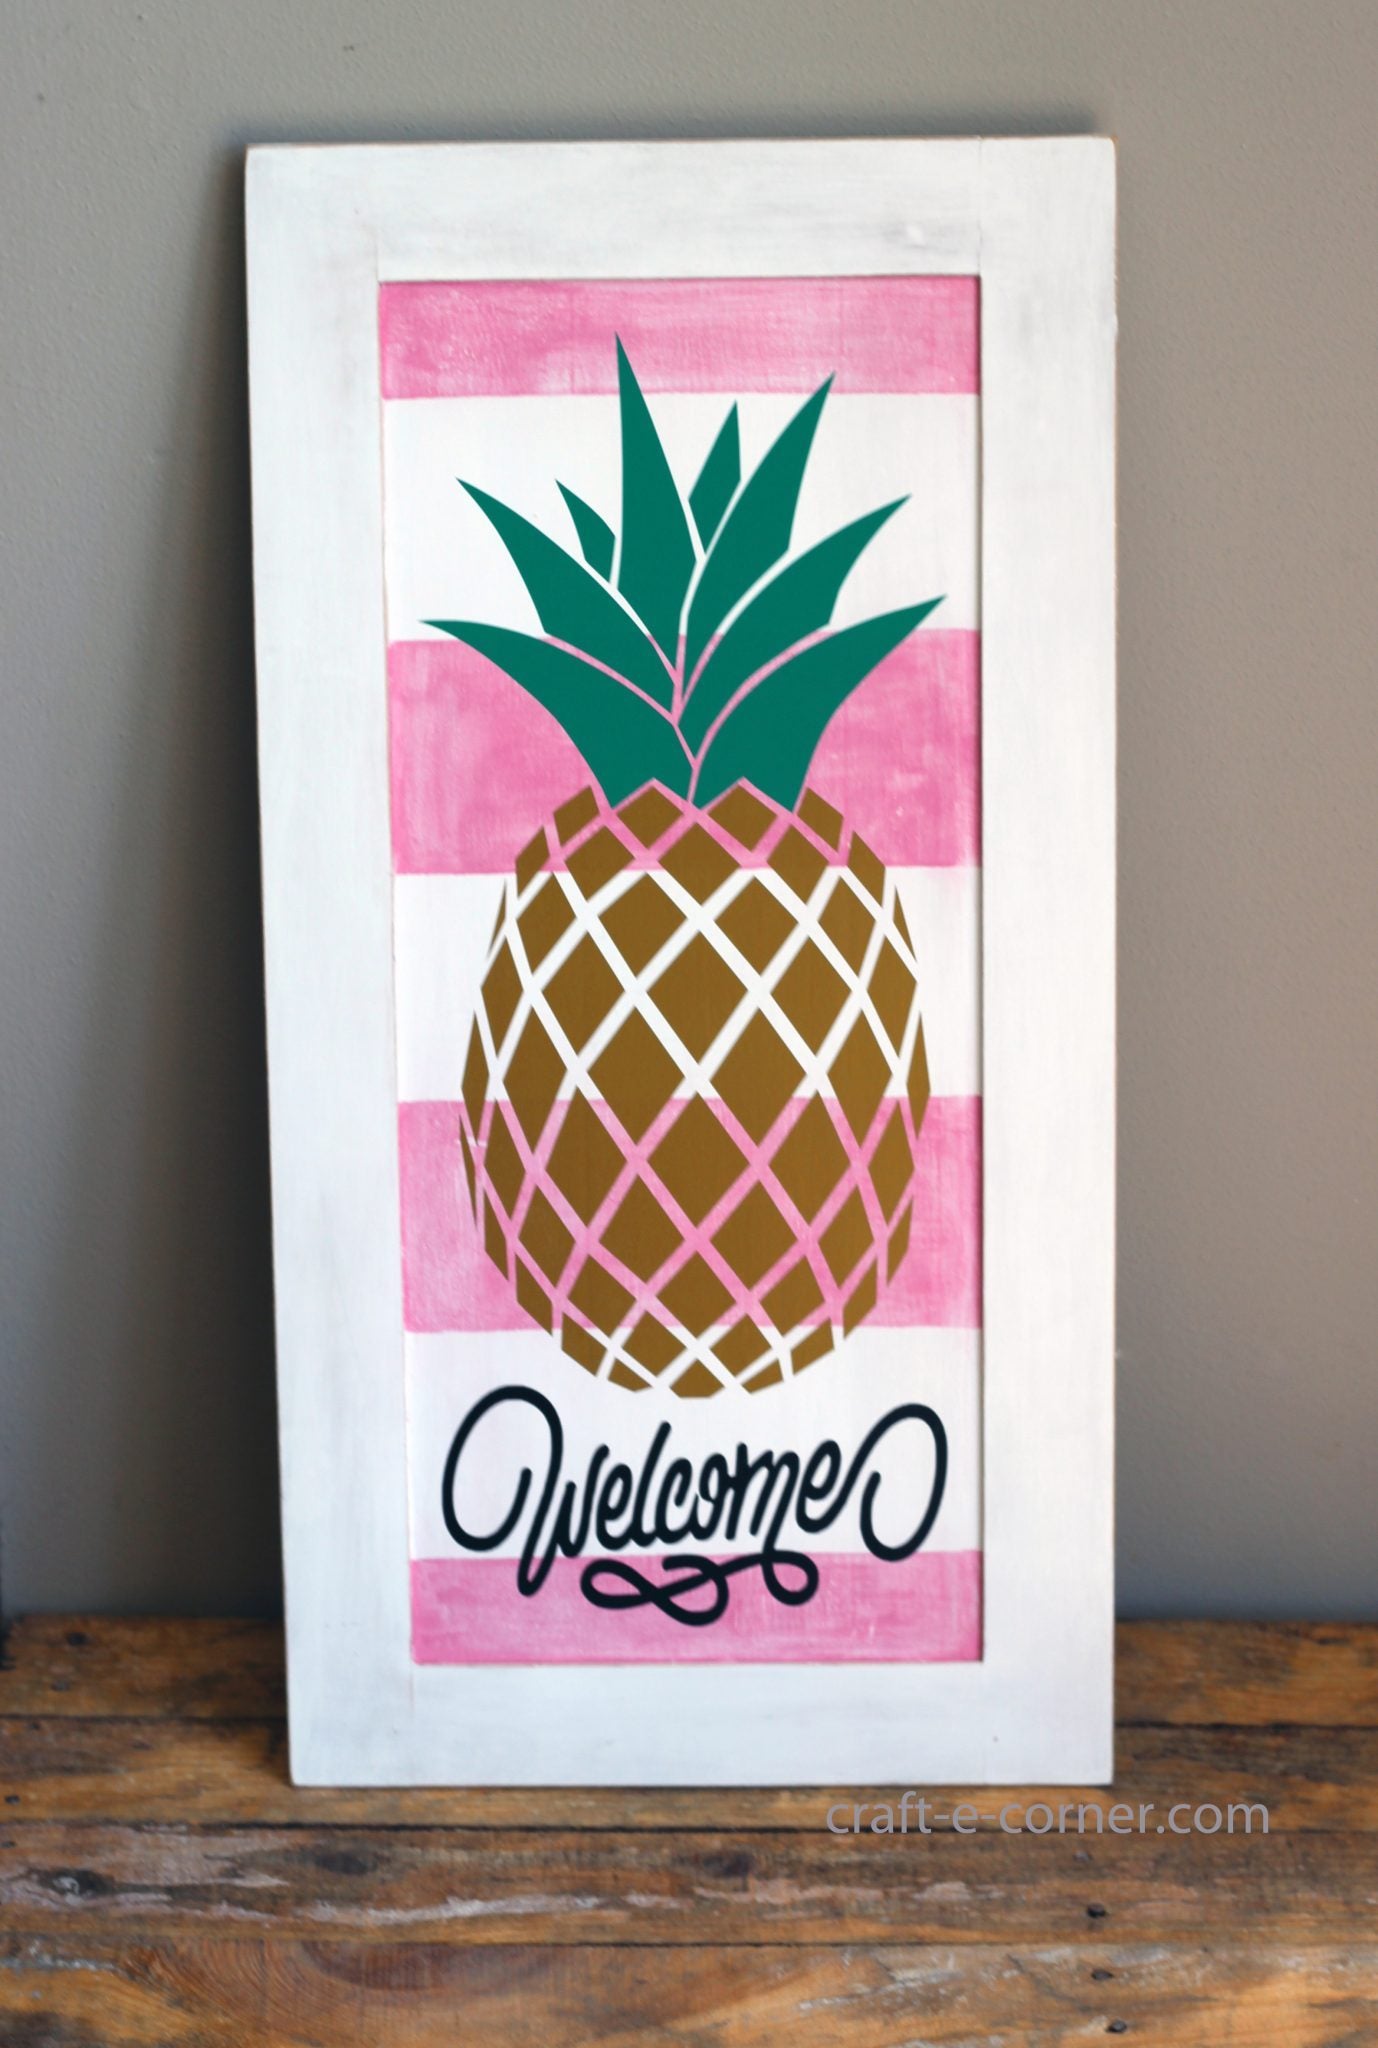 Design #1: Pineapple! Pineapple Welcome Sign